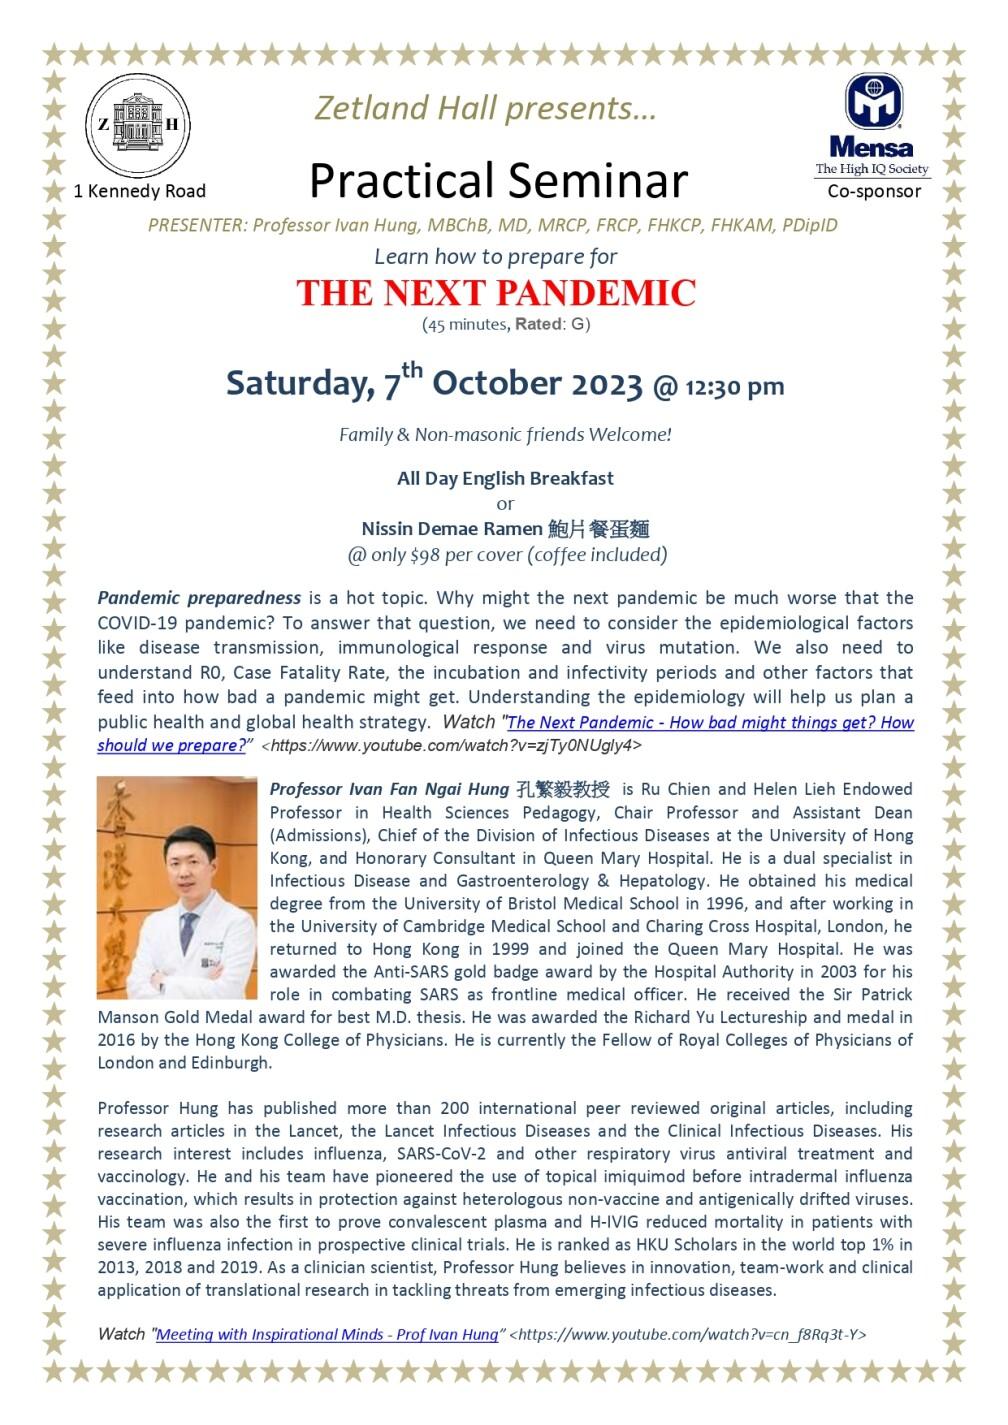 Practical Seminar: How to Prepare for the Next Pandemic image